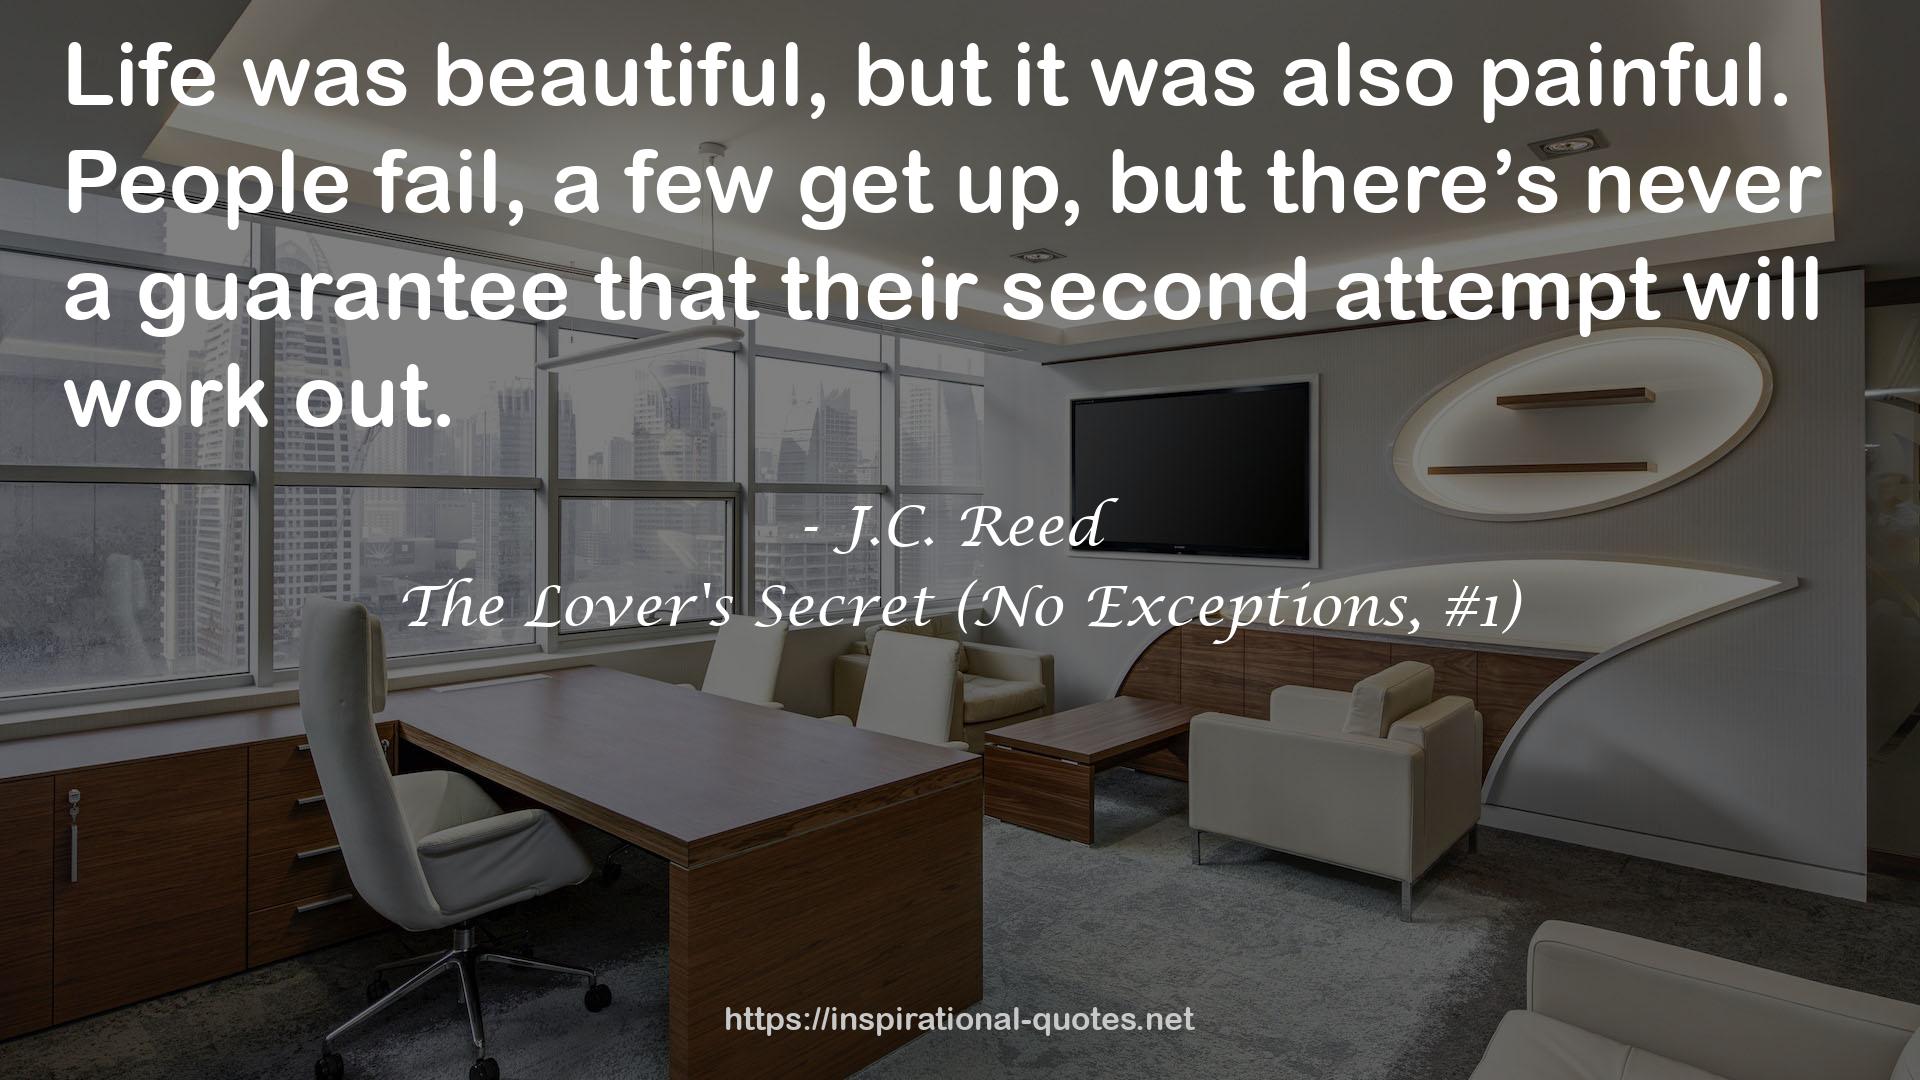 The Lover's Secret (No Exceptions, #1) QUOTES